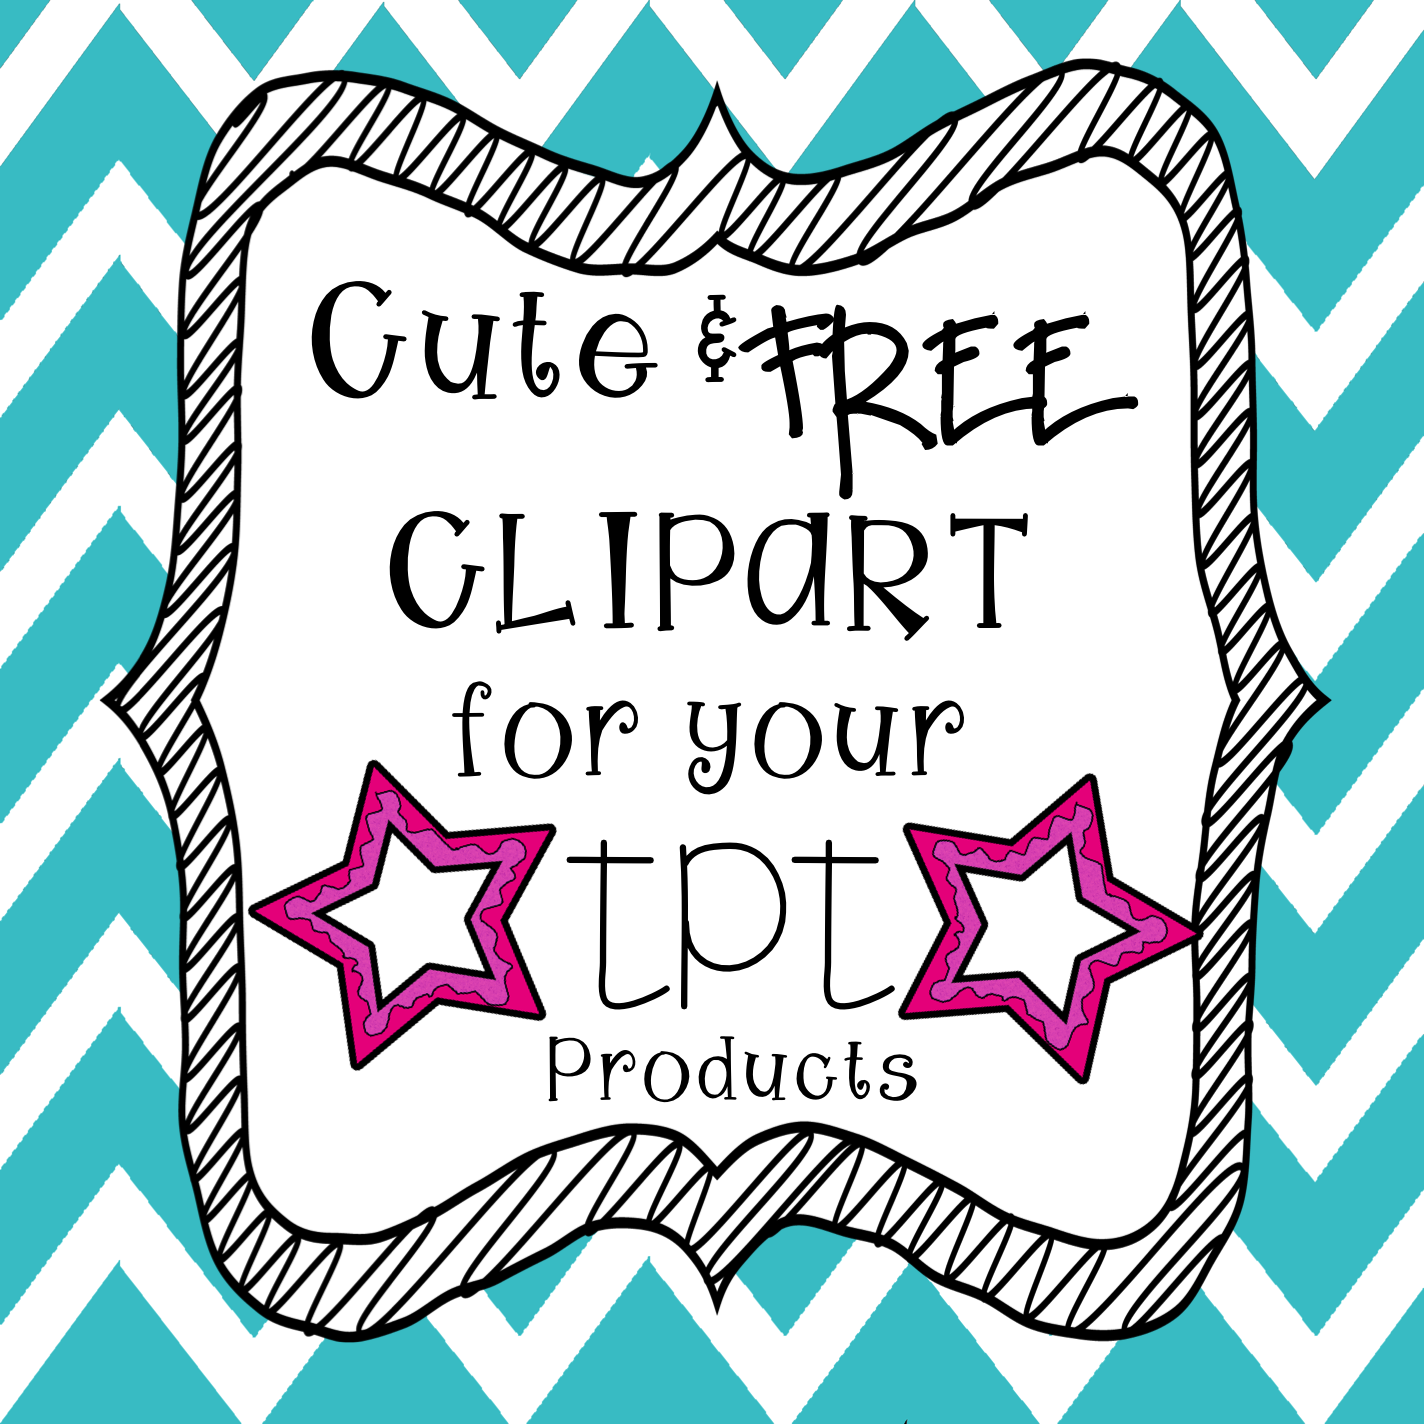 At Whit's End: Cute & Free Clipart